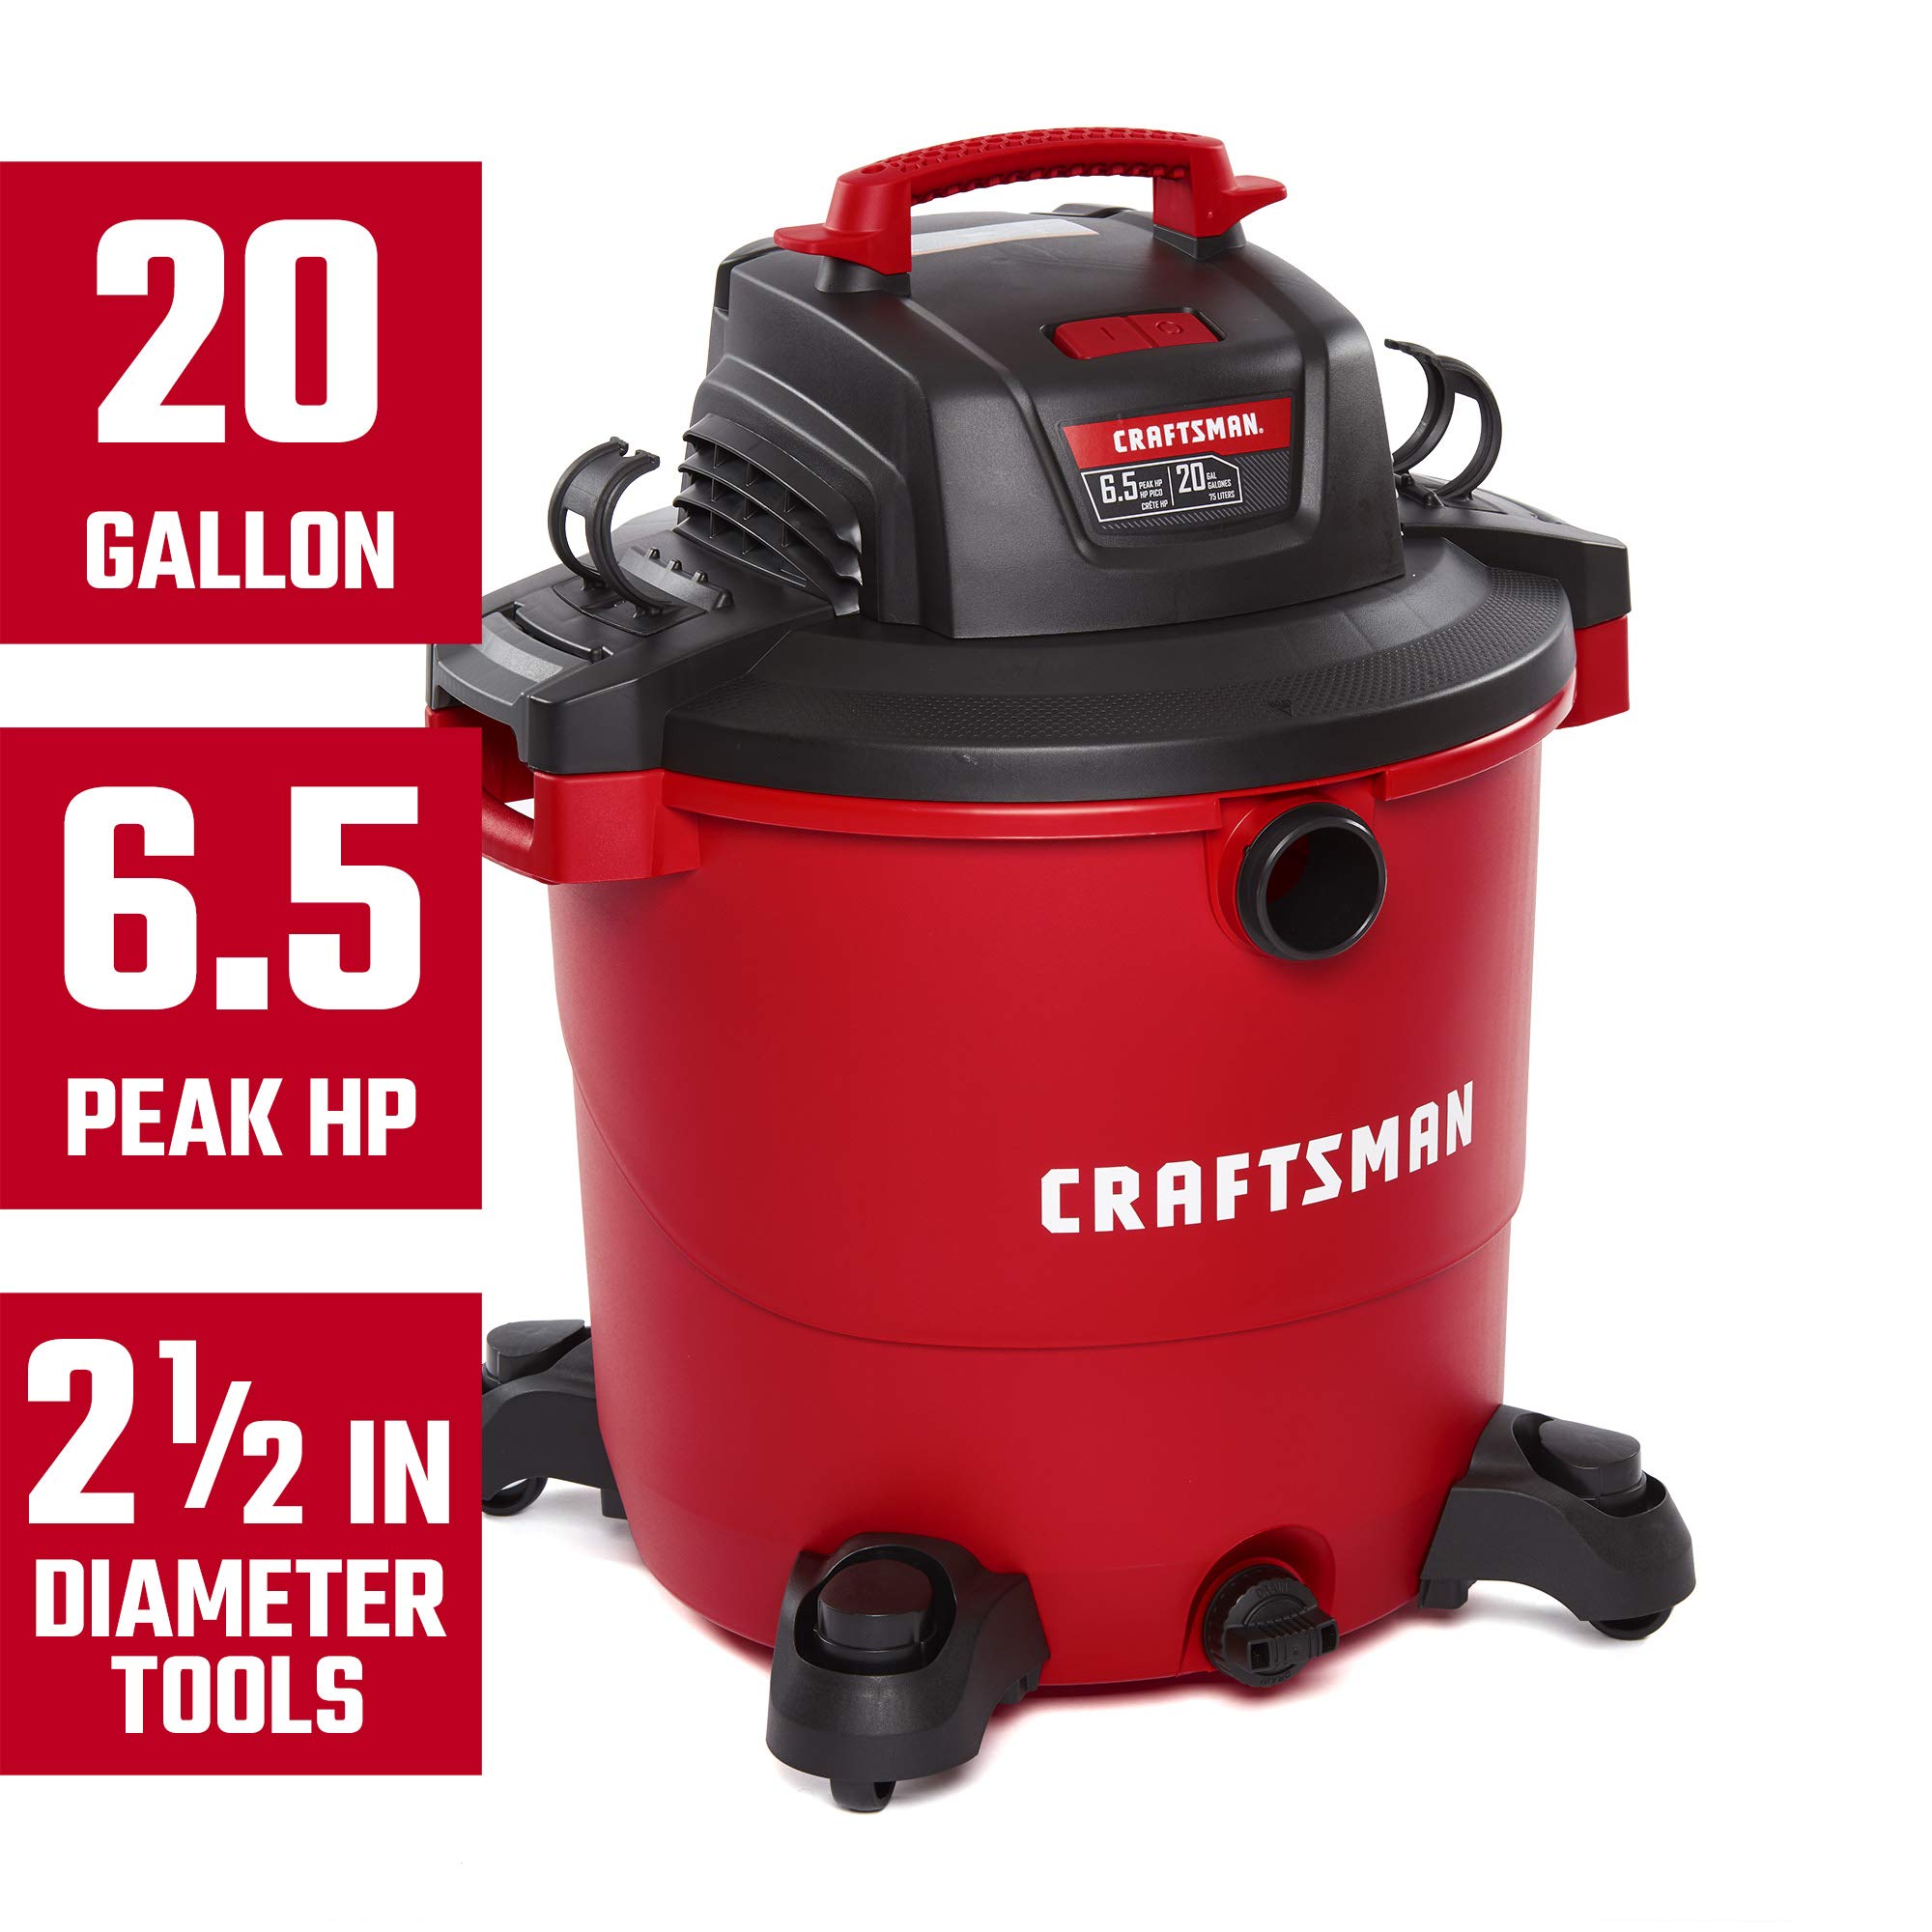 CRAFTSMAN CMXEVBE17596 20 Gallon 6.5 Peak HP Wet/Dry Vac, Heavy-Duty Shop Vacuum with 20-Foot Hose Kit and General Purpose Filter